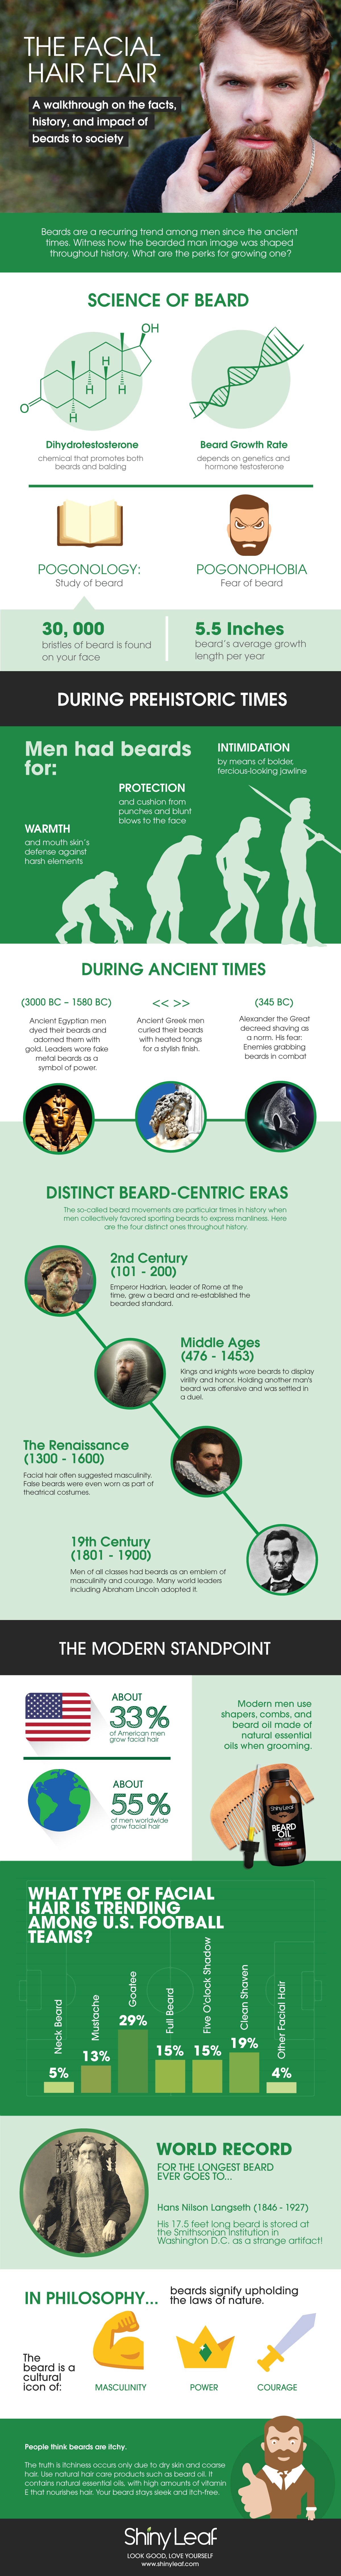 Information and tips about beard care